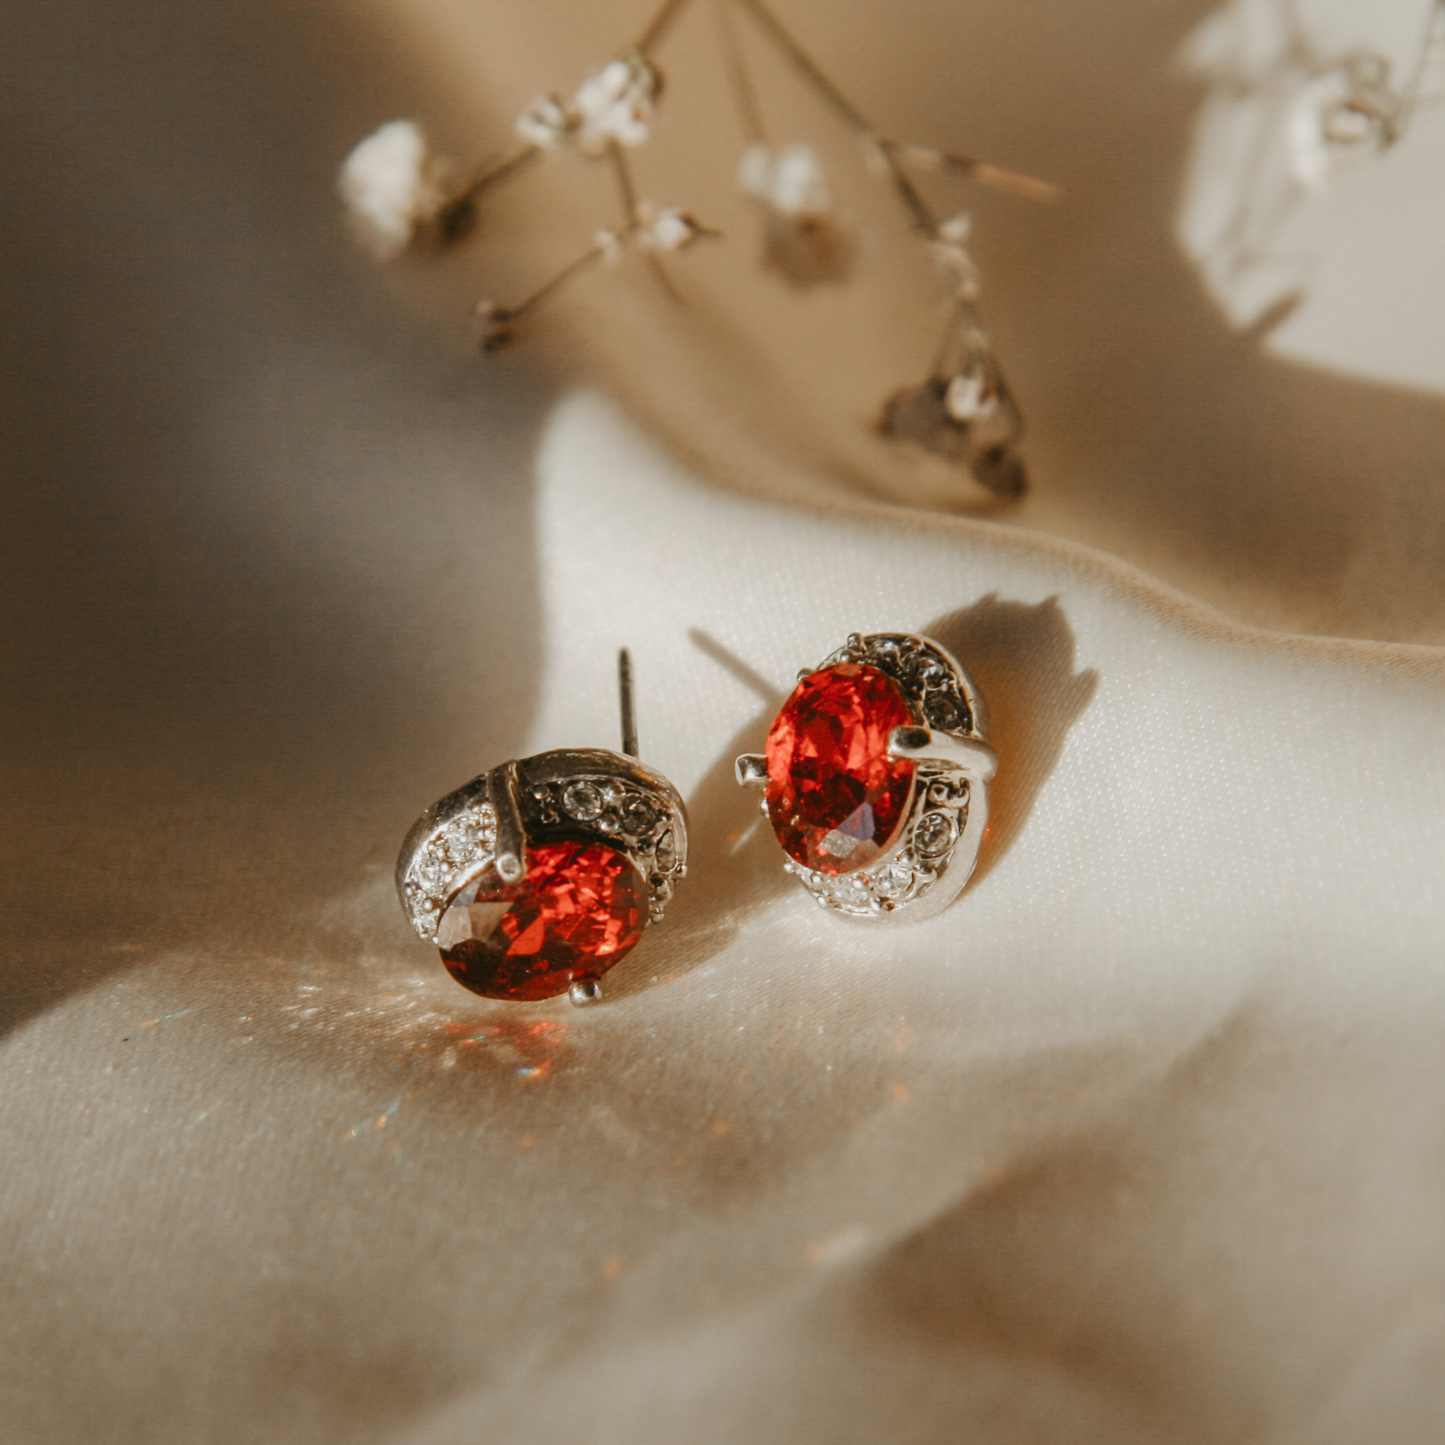 anna karenina vintage earrings by Avery Faye bookish and literature inspired jewellery